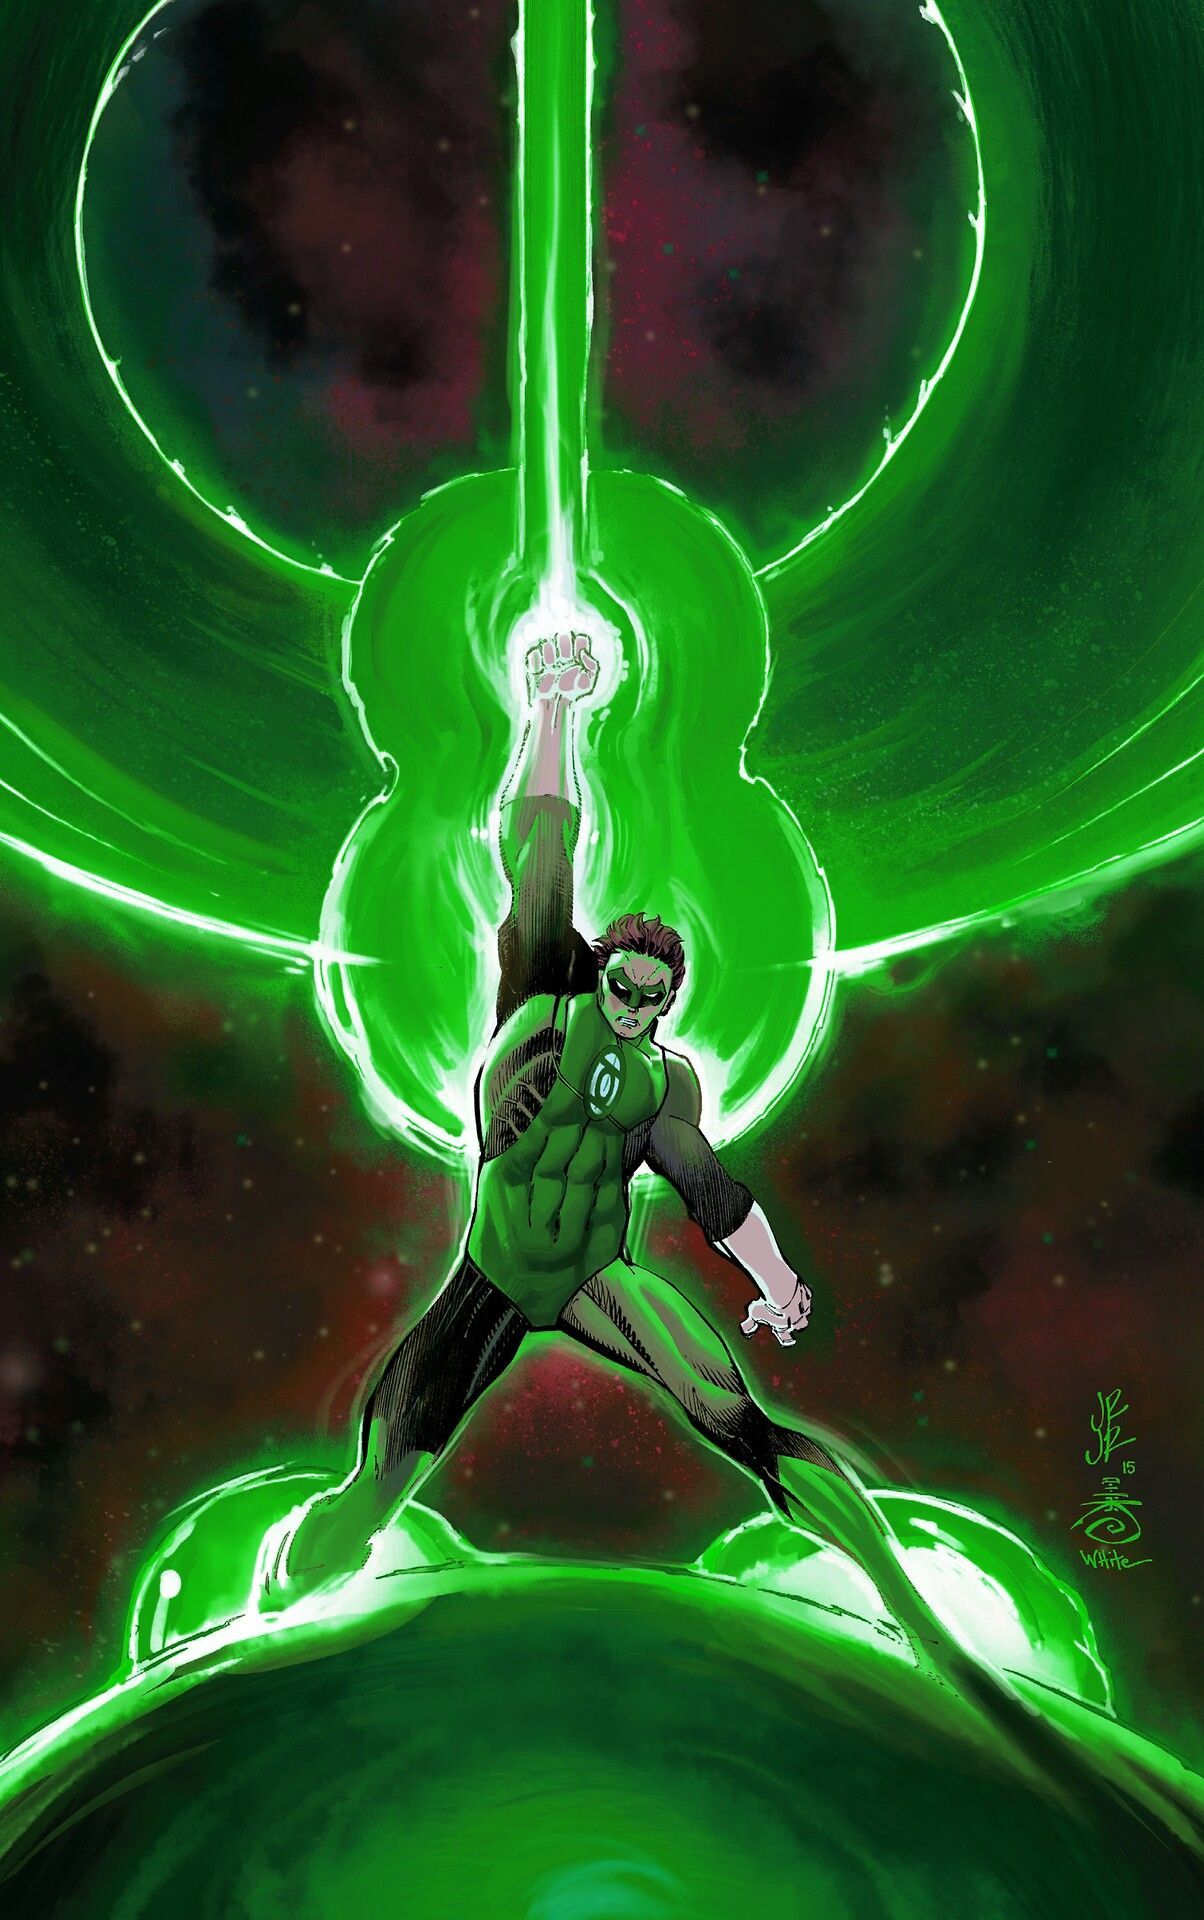 Best Green Lantern Picture And Other Sci Fi Characters Image